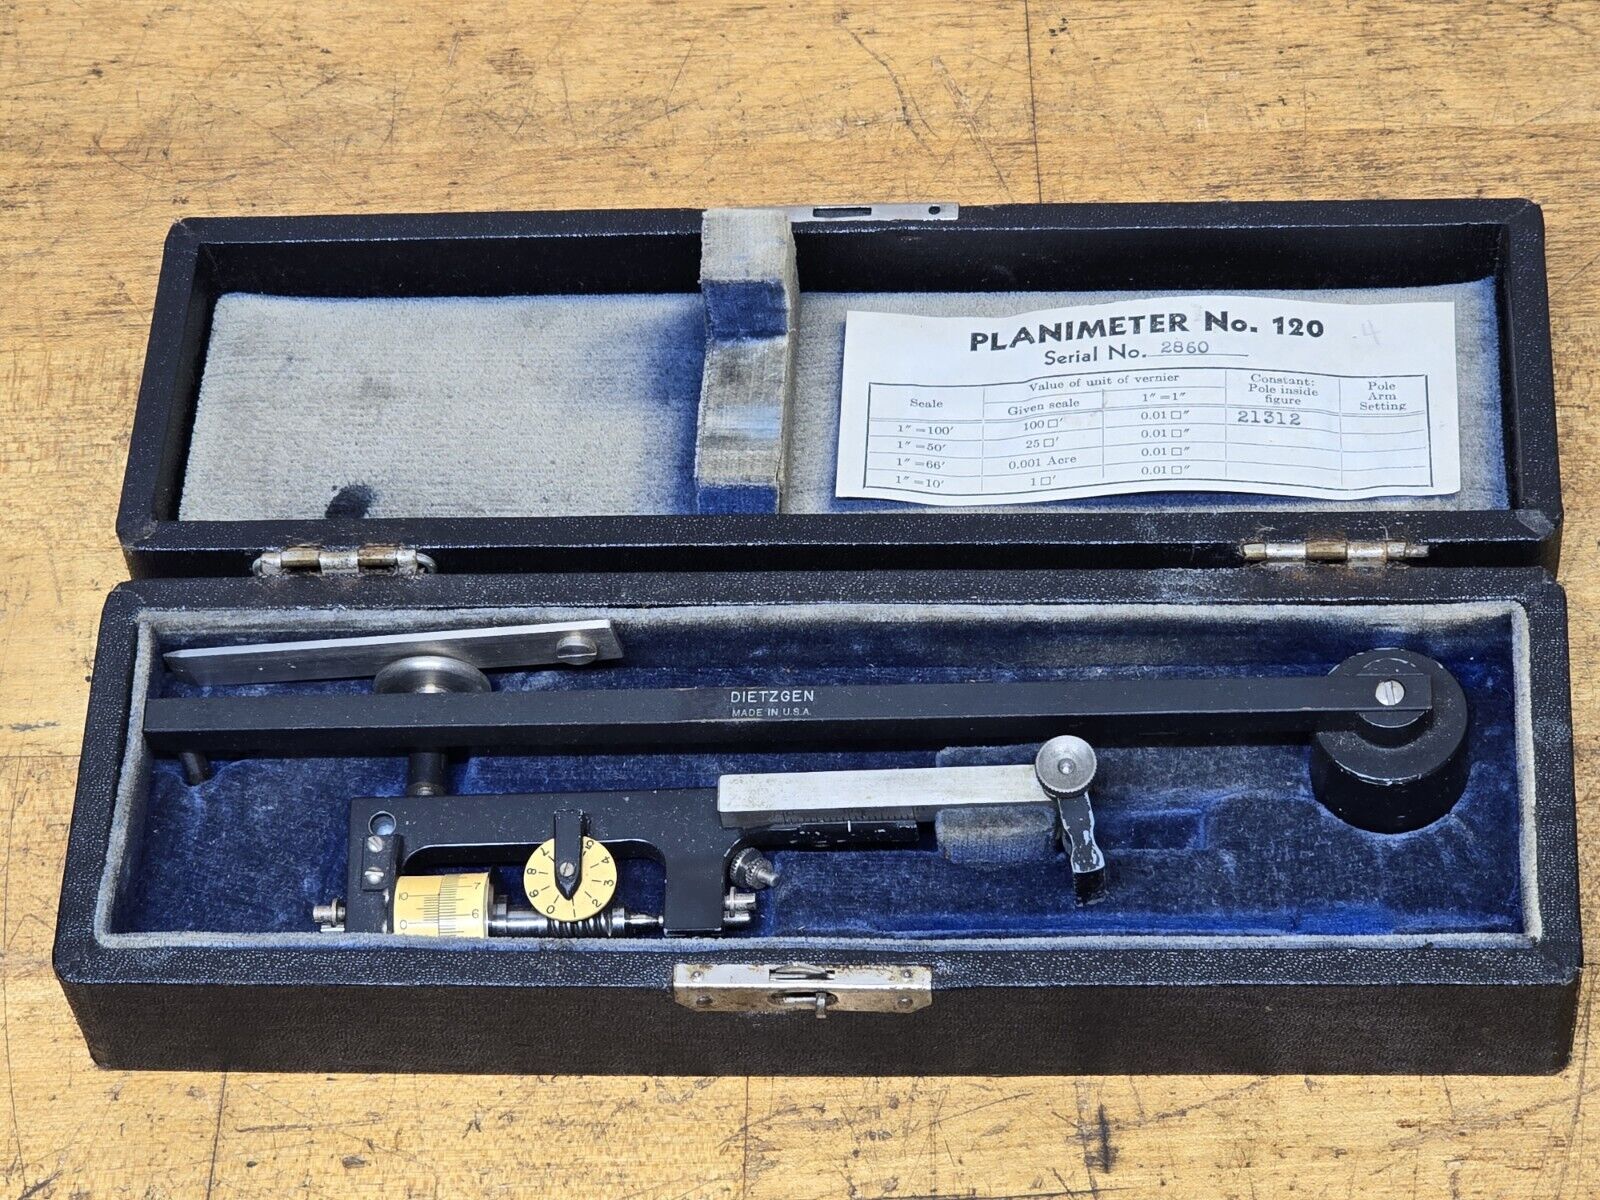 Dietzgen Planimeter No. 120 Drafting Technical Drawing Tools Vintage  Made USA